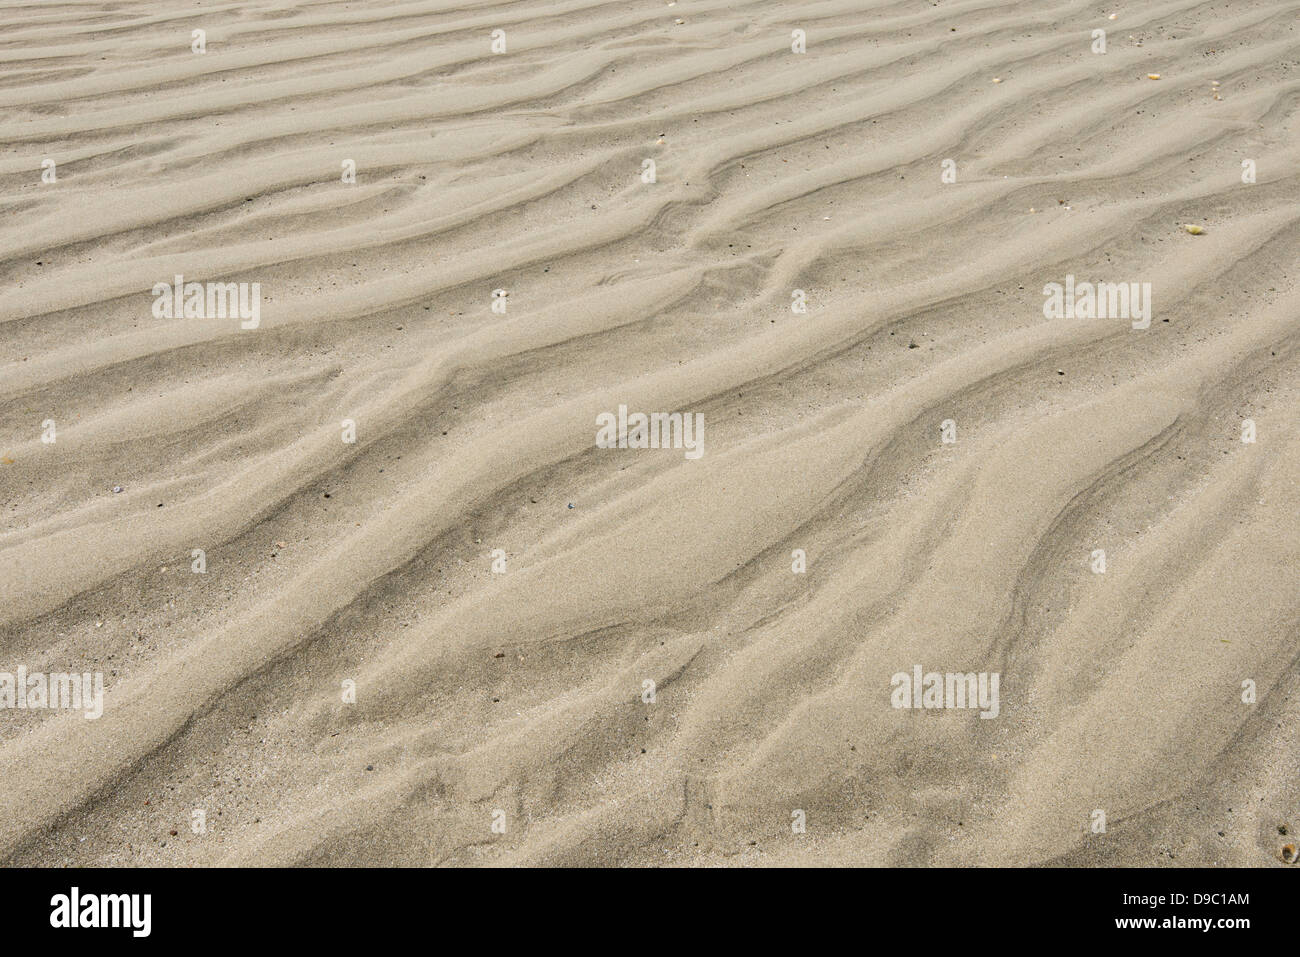 Ripples on sandy beach caused by the lapping of waves. Stock Photo